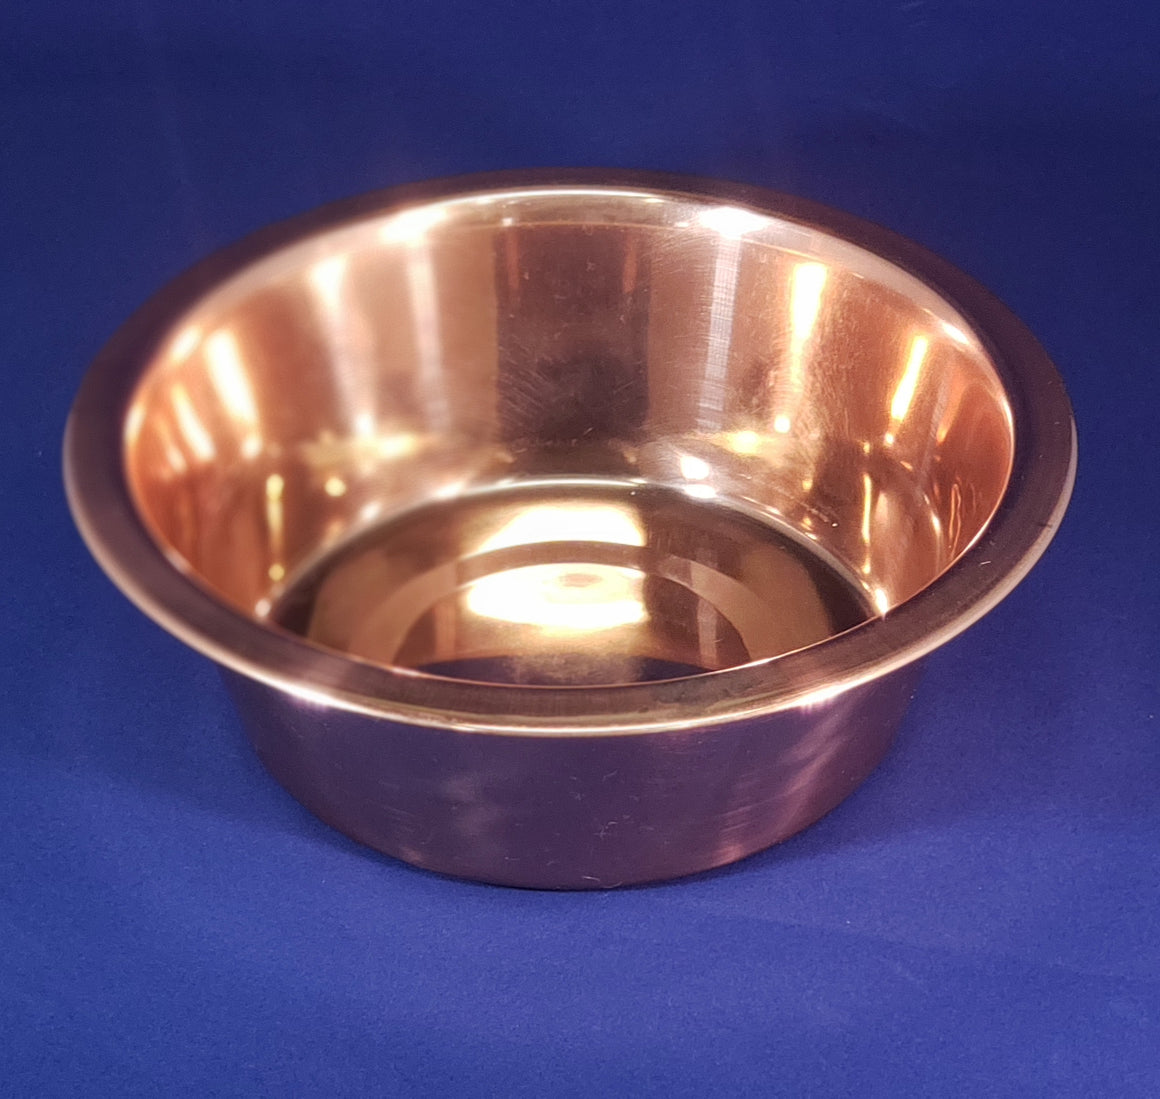 Save up to 40% on Scratch & Dent COPPER bowls! (Regular Style)